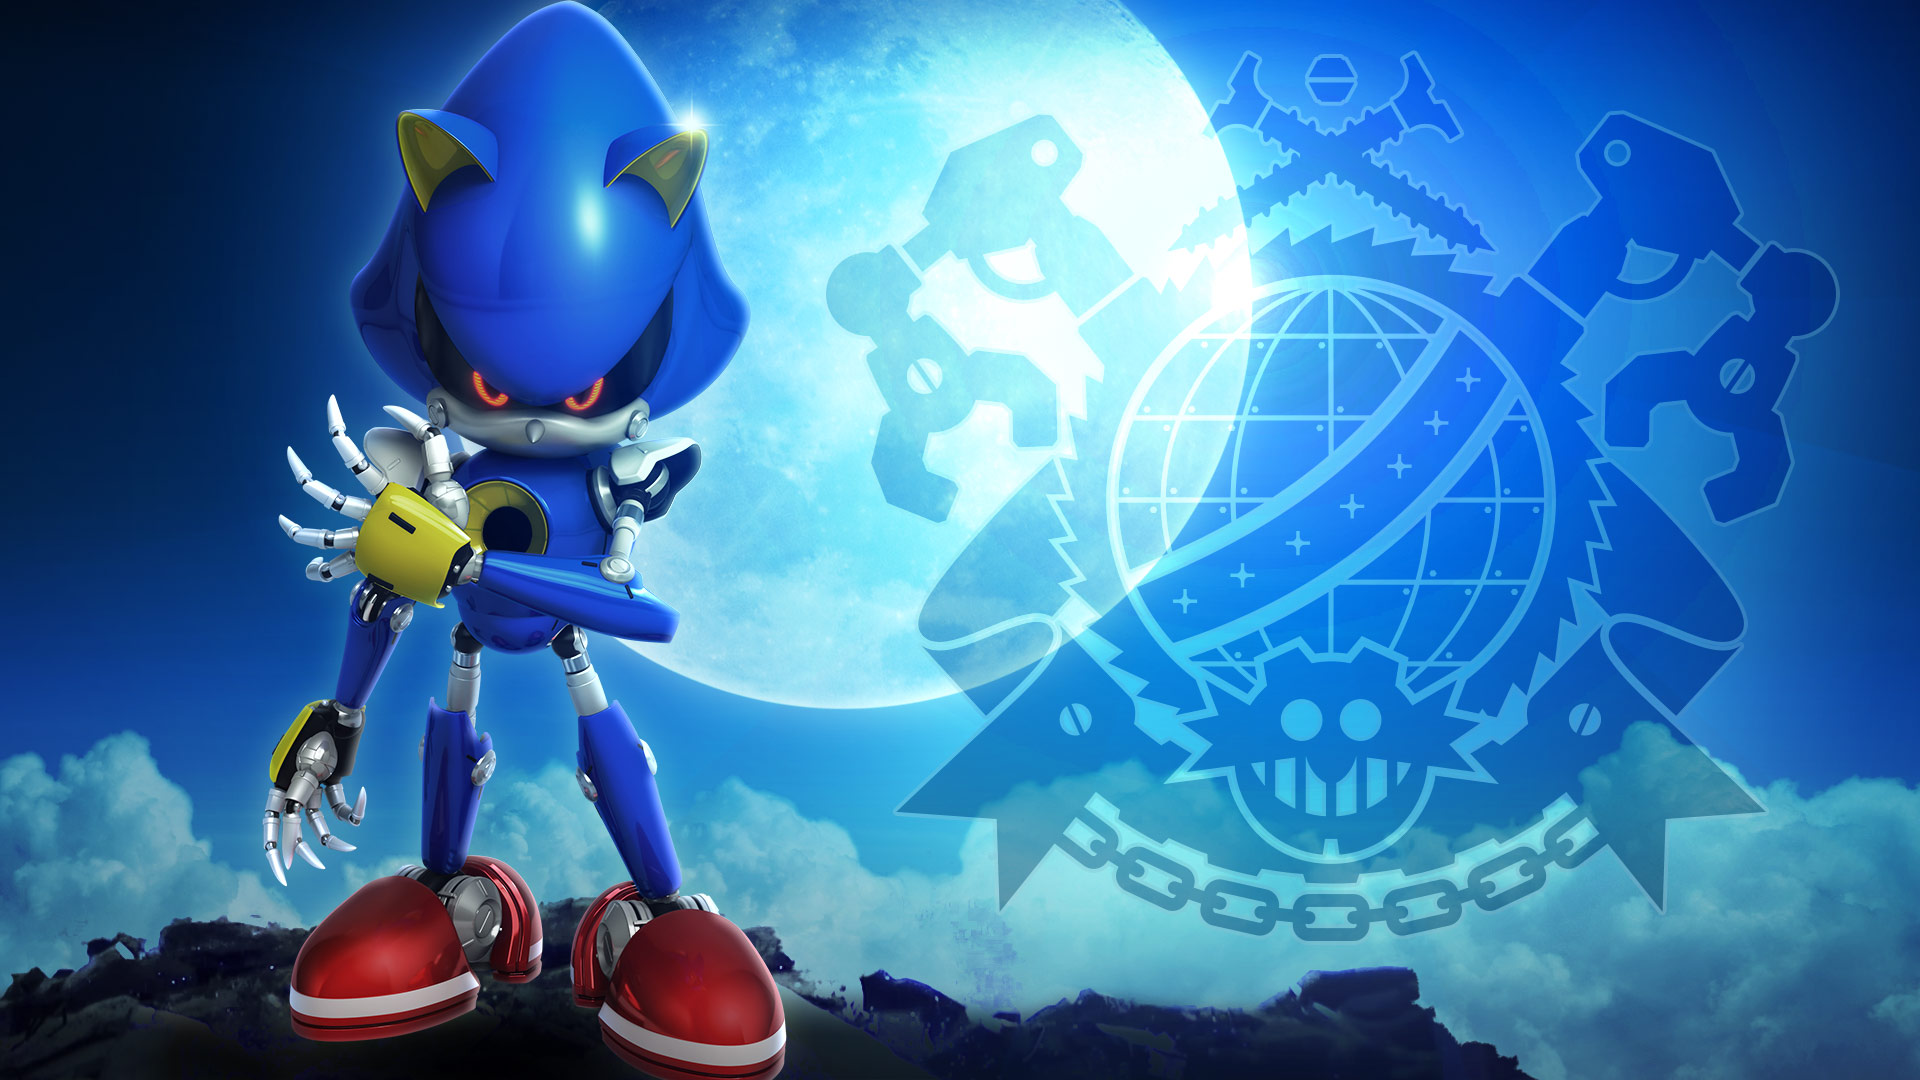 Free Download Sonic Vs Metal Sonic Wallpaper about life